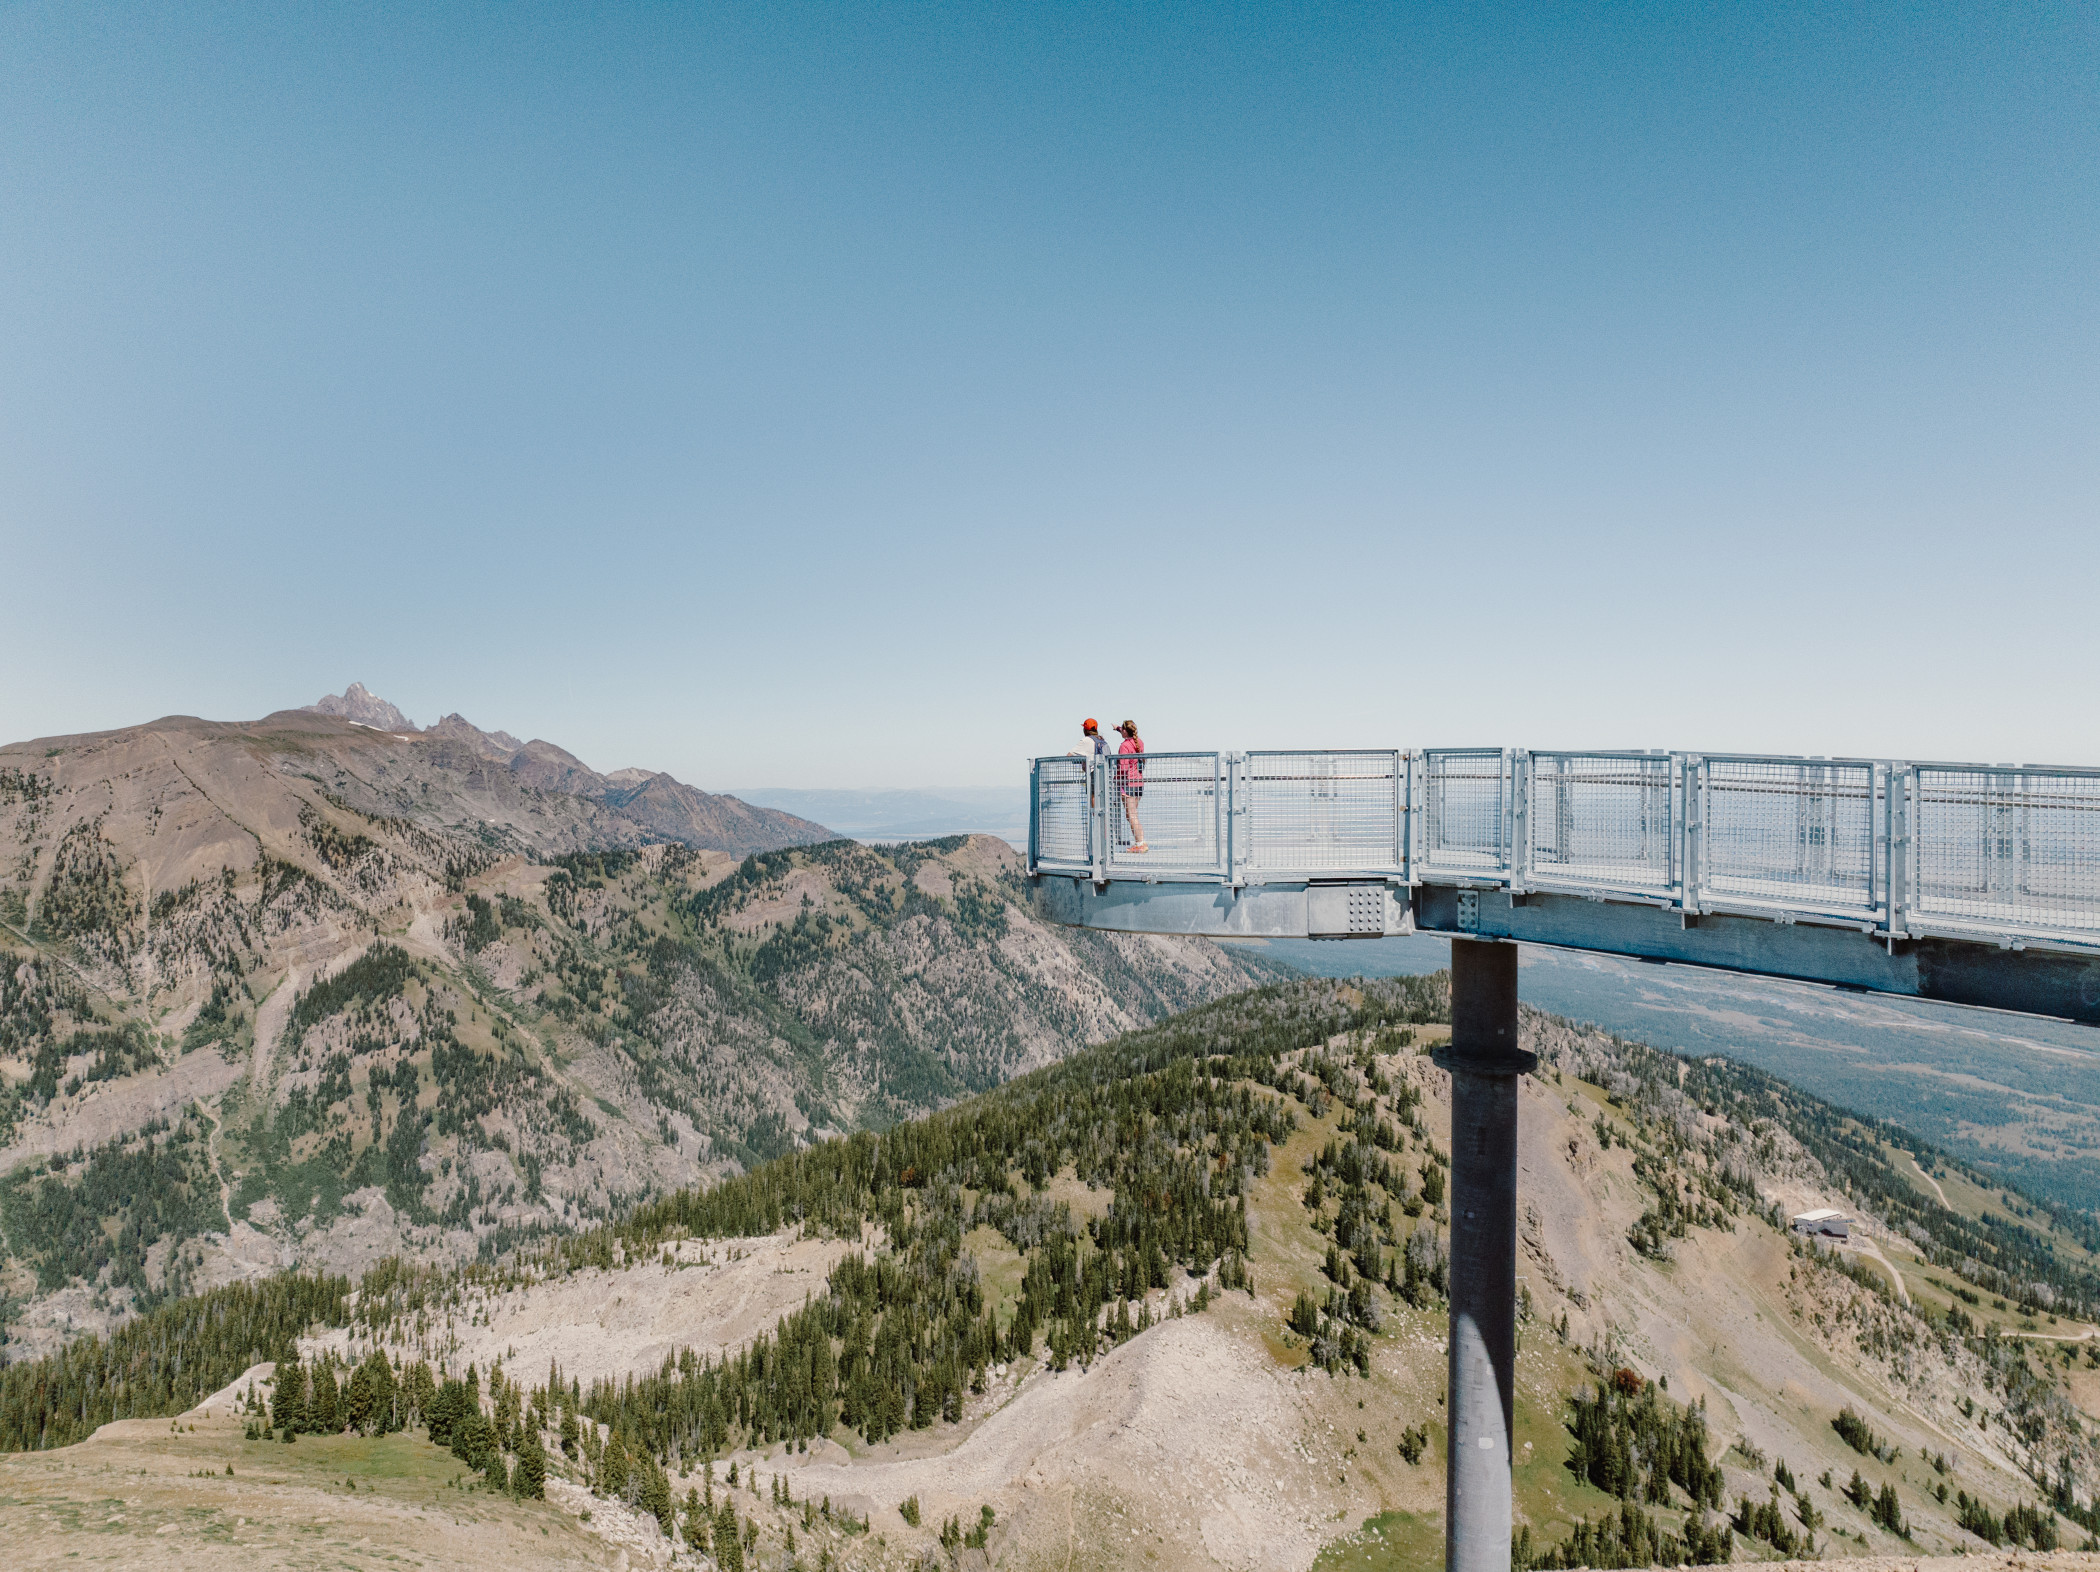 A viewing platform overlooking the mountains